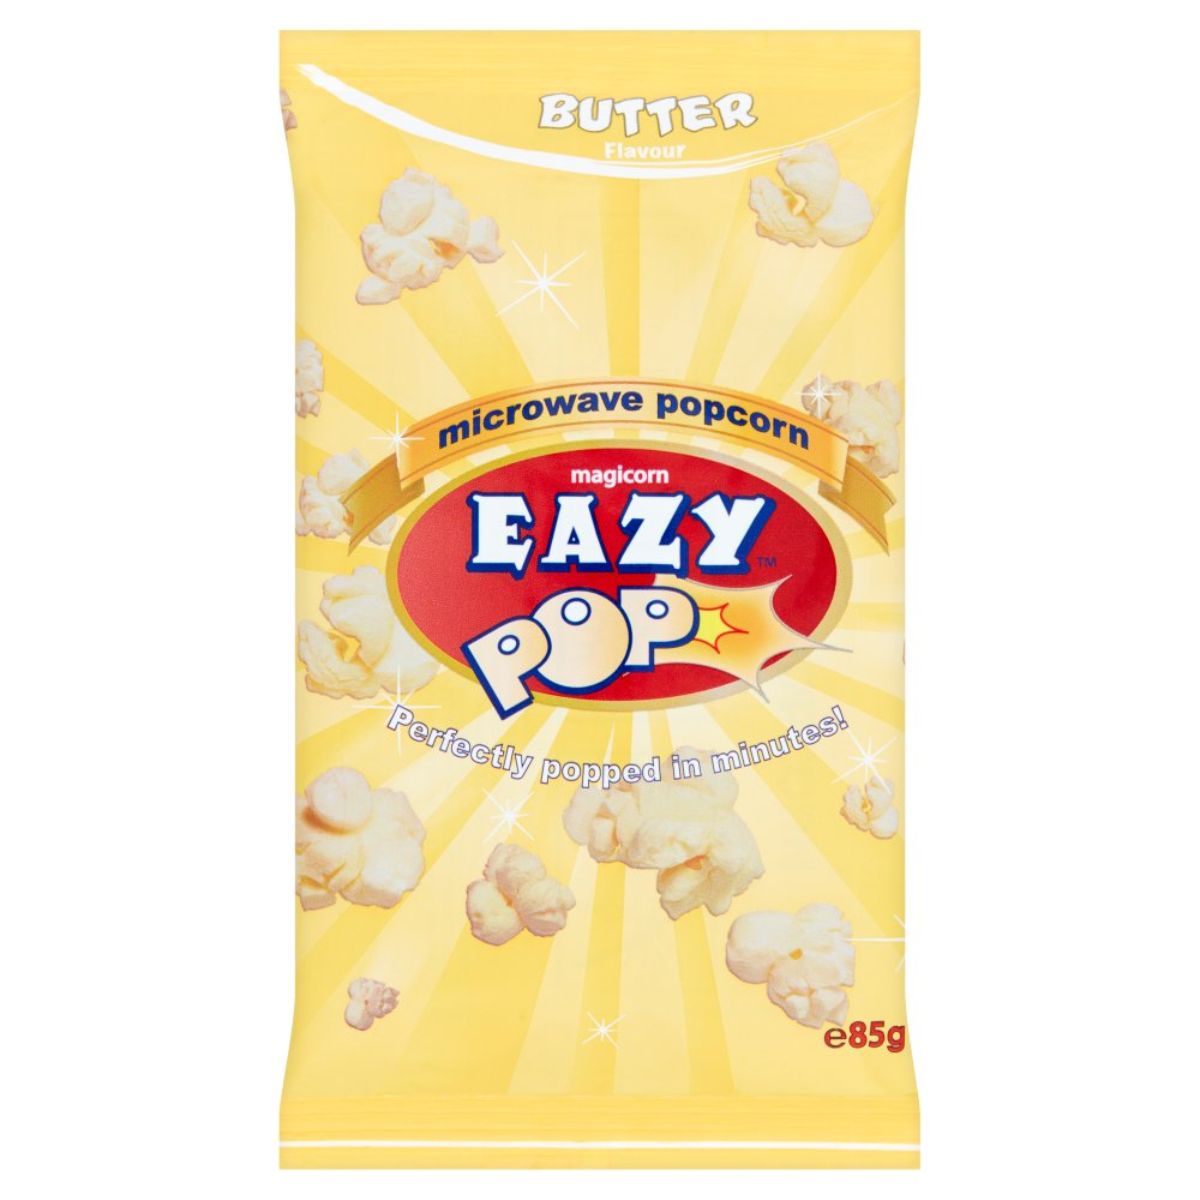 A bag of Eazy Pop - Magicorn Microwave Popcorn Butter Flavour - 85g on a white background.